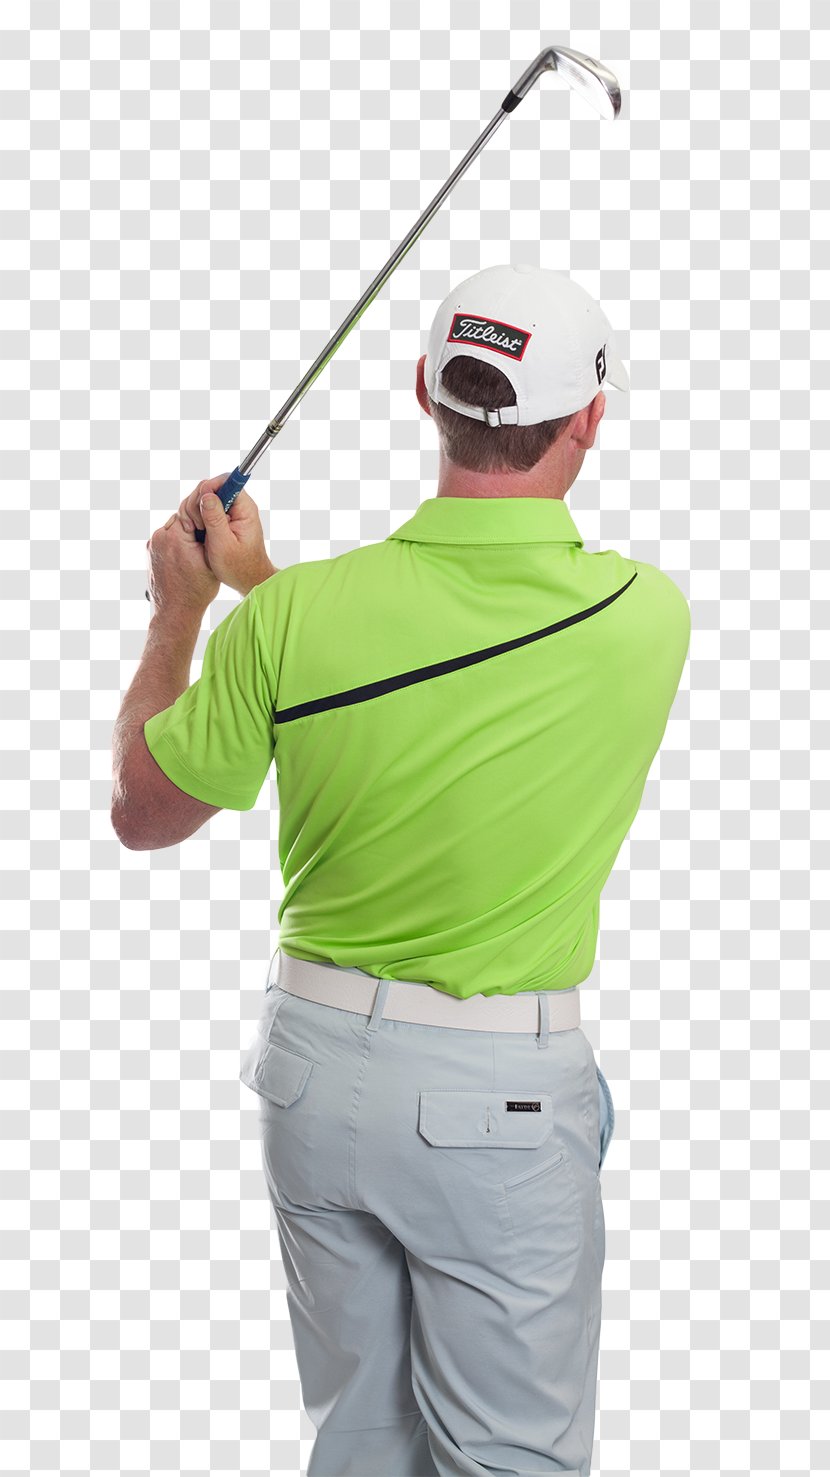 Putter T-shirt Match Play Golf Clothing - Personal Protective Equipment Transparent PNG